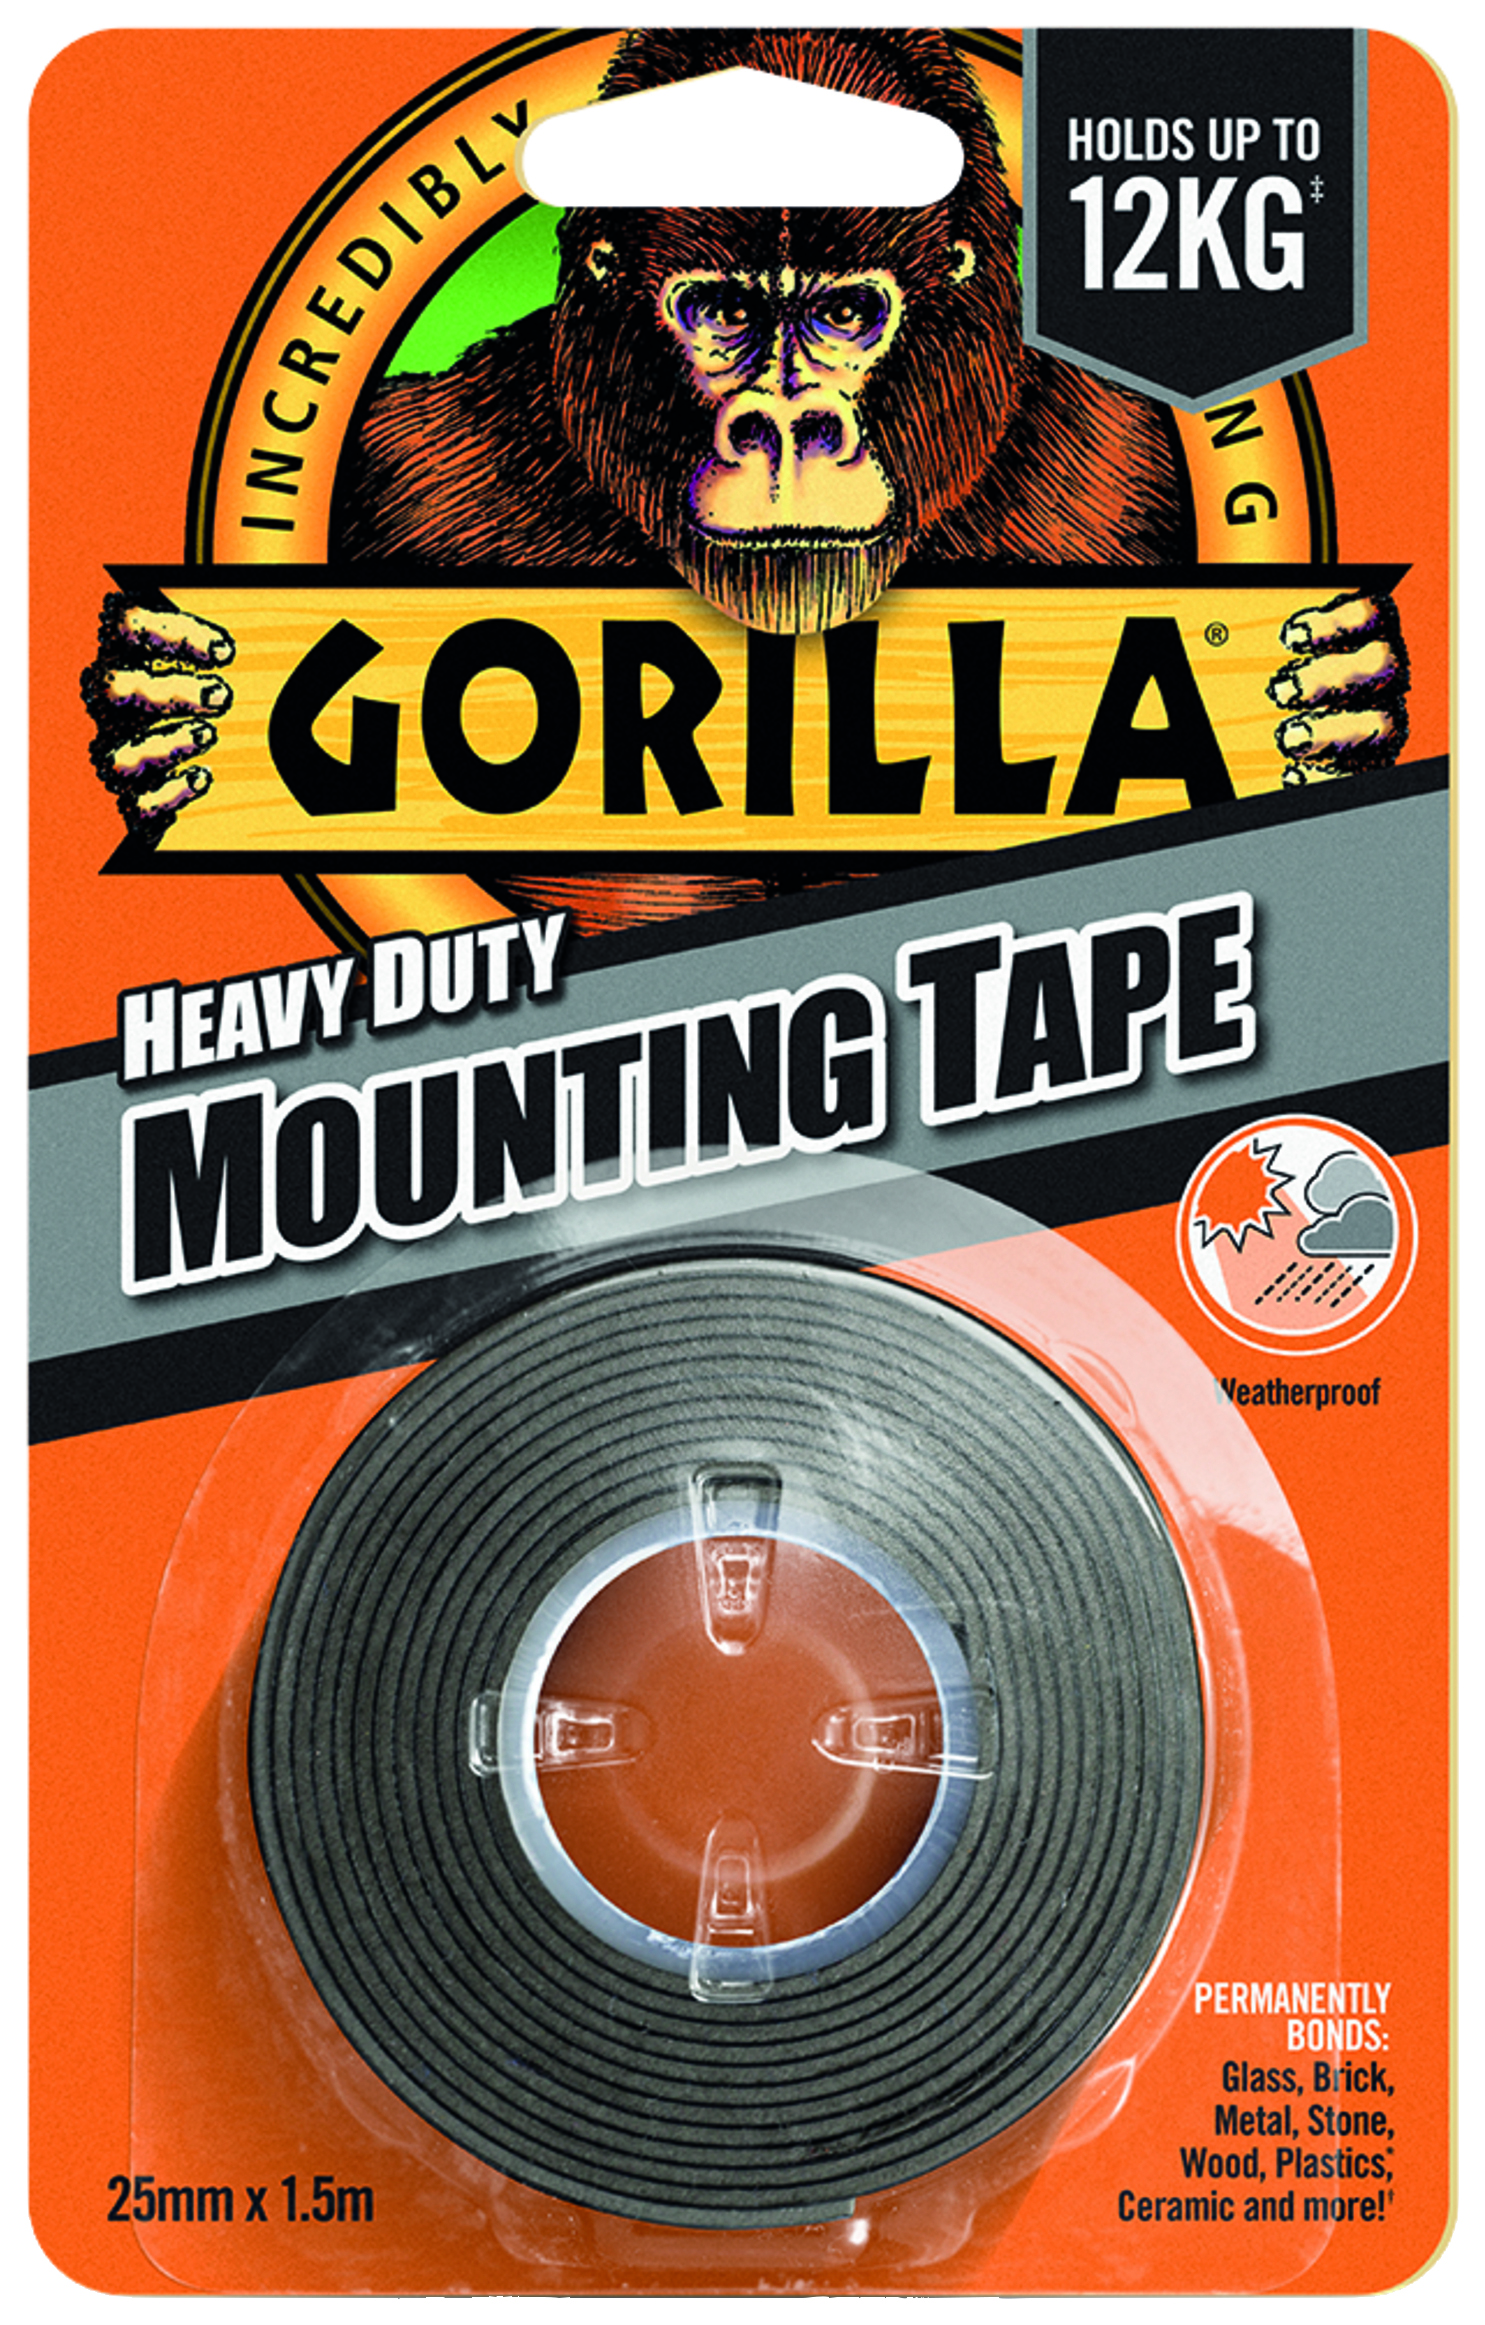 Gorilla Heavy Duty Double Sided Mounting Tape up to 12kg - 1.5m